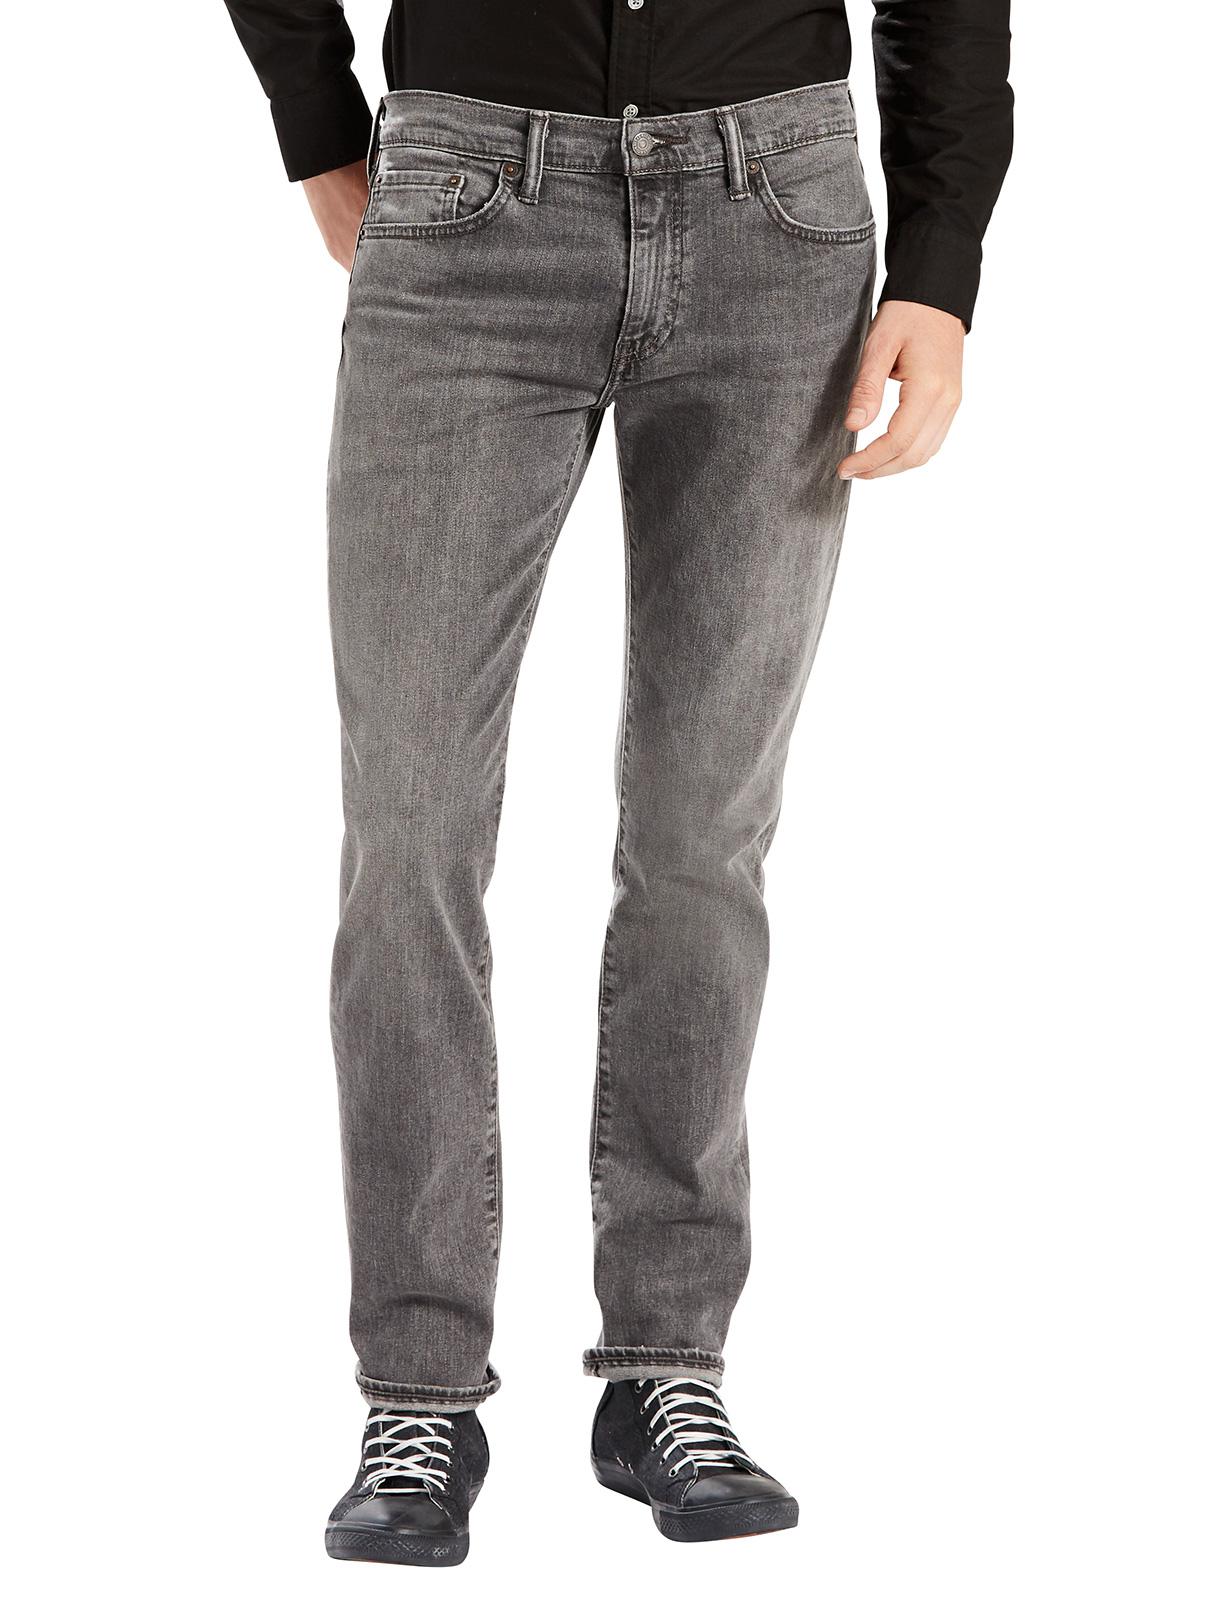 Levi's Denim Charcoal 511 Slim Fit Berry Hill Jeans in Gray for Men - Lyst